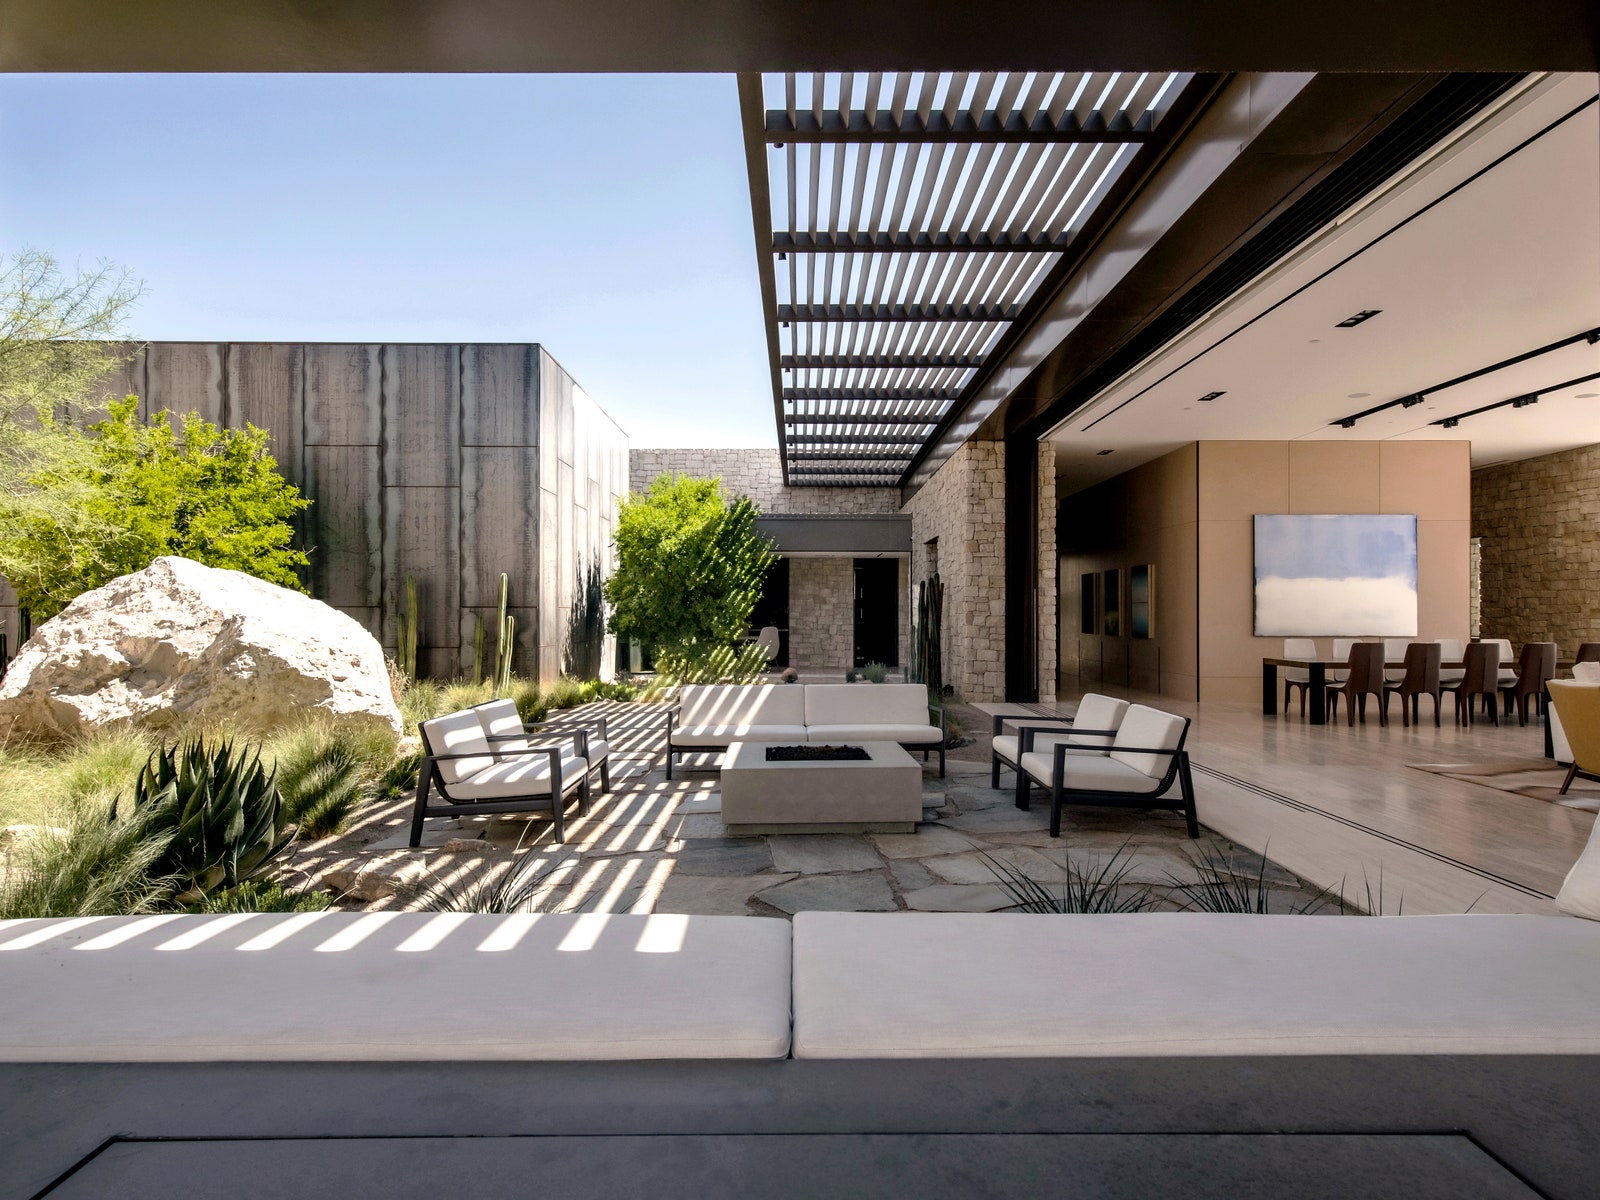 8 Covetable Ideas for Indoor-Outdoor Living From AD PRO Directory Architects